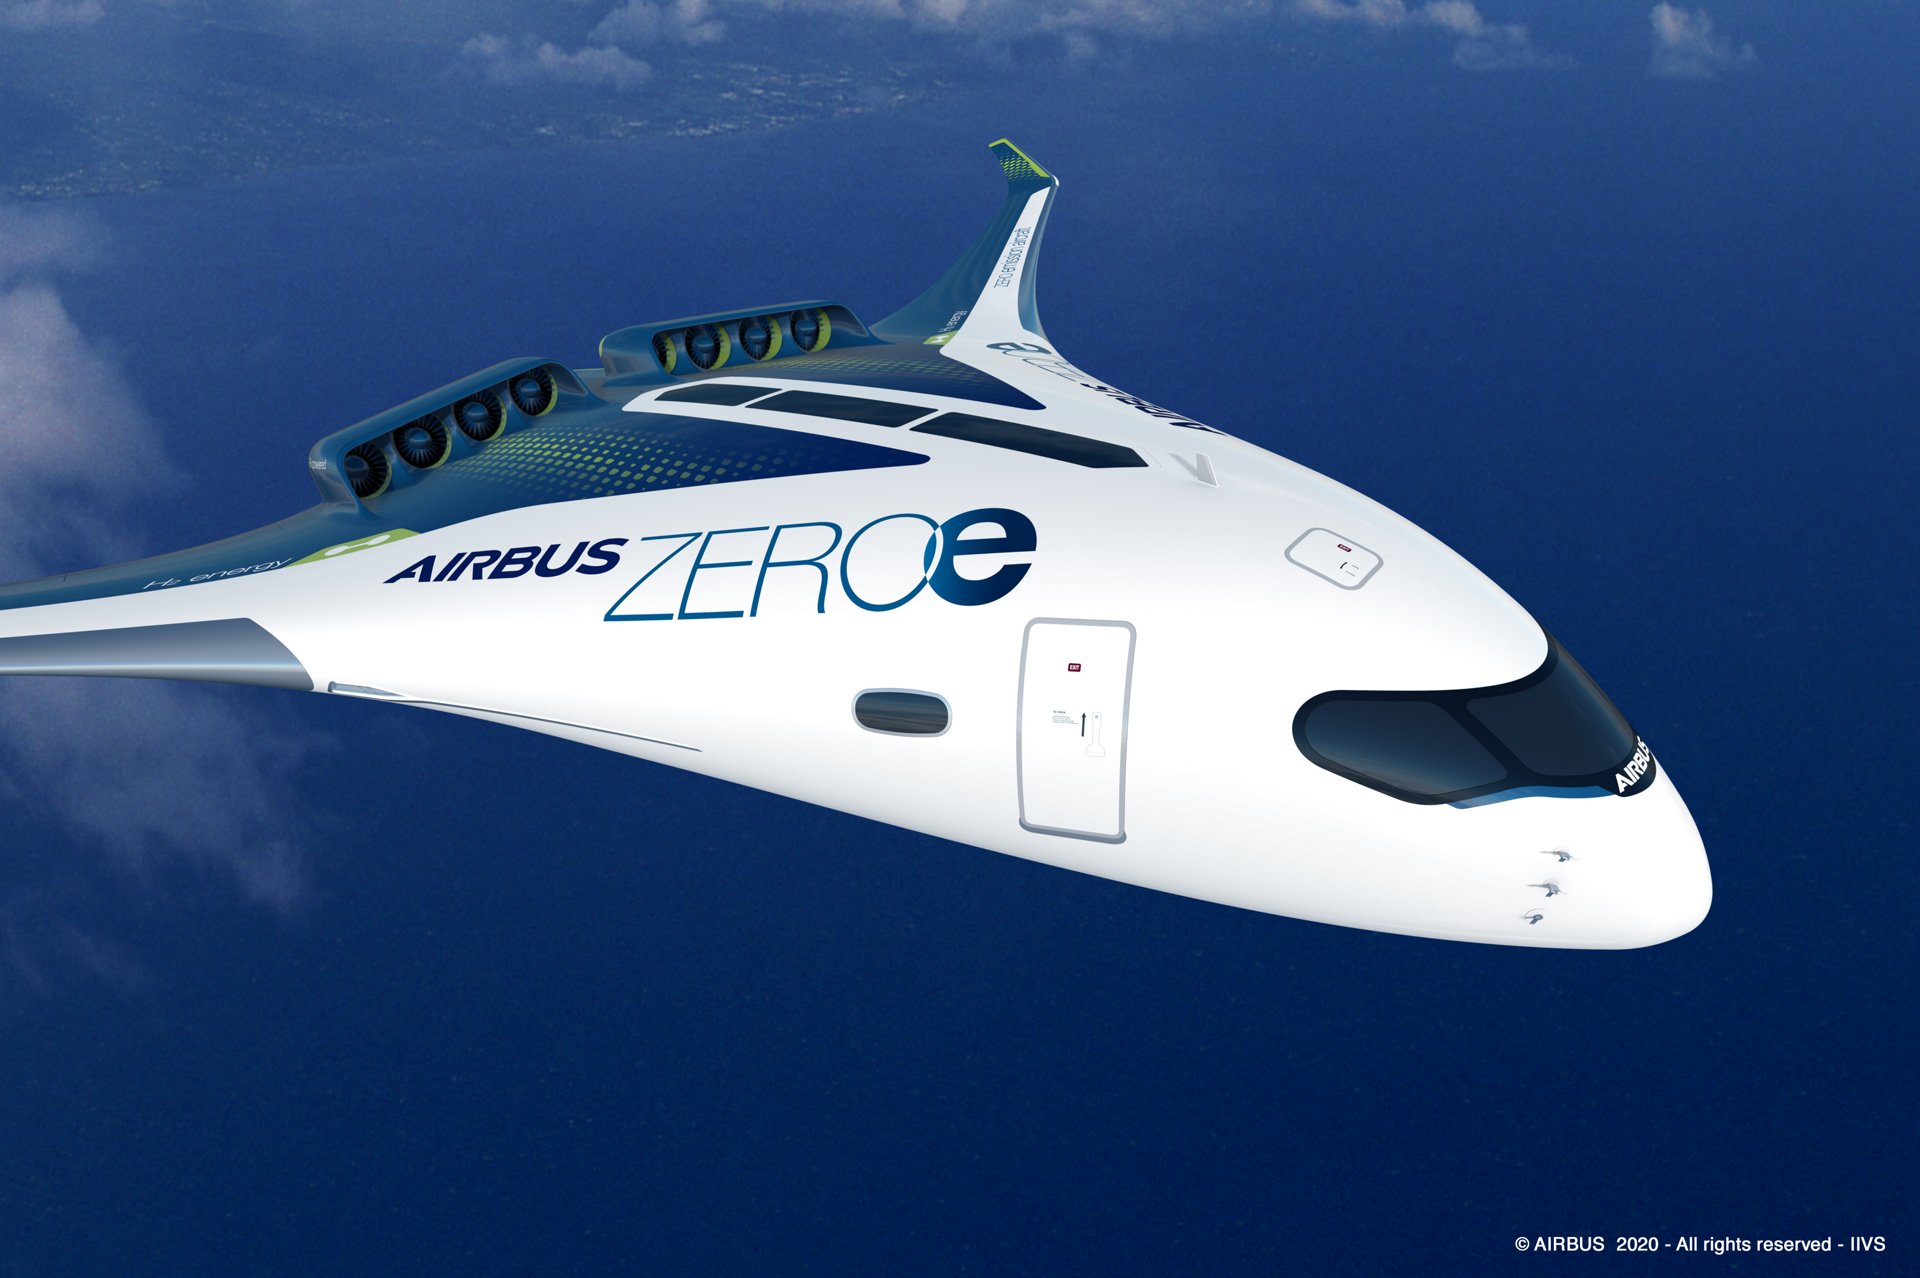 ZEROe is an Airbus concept aircraft. In the blended-wing body configuration, two hybrid hydrogen turbofan engines provide thrust. The liquid hydrogen storage tanks are stored underneath the wings.